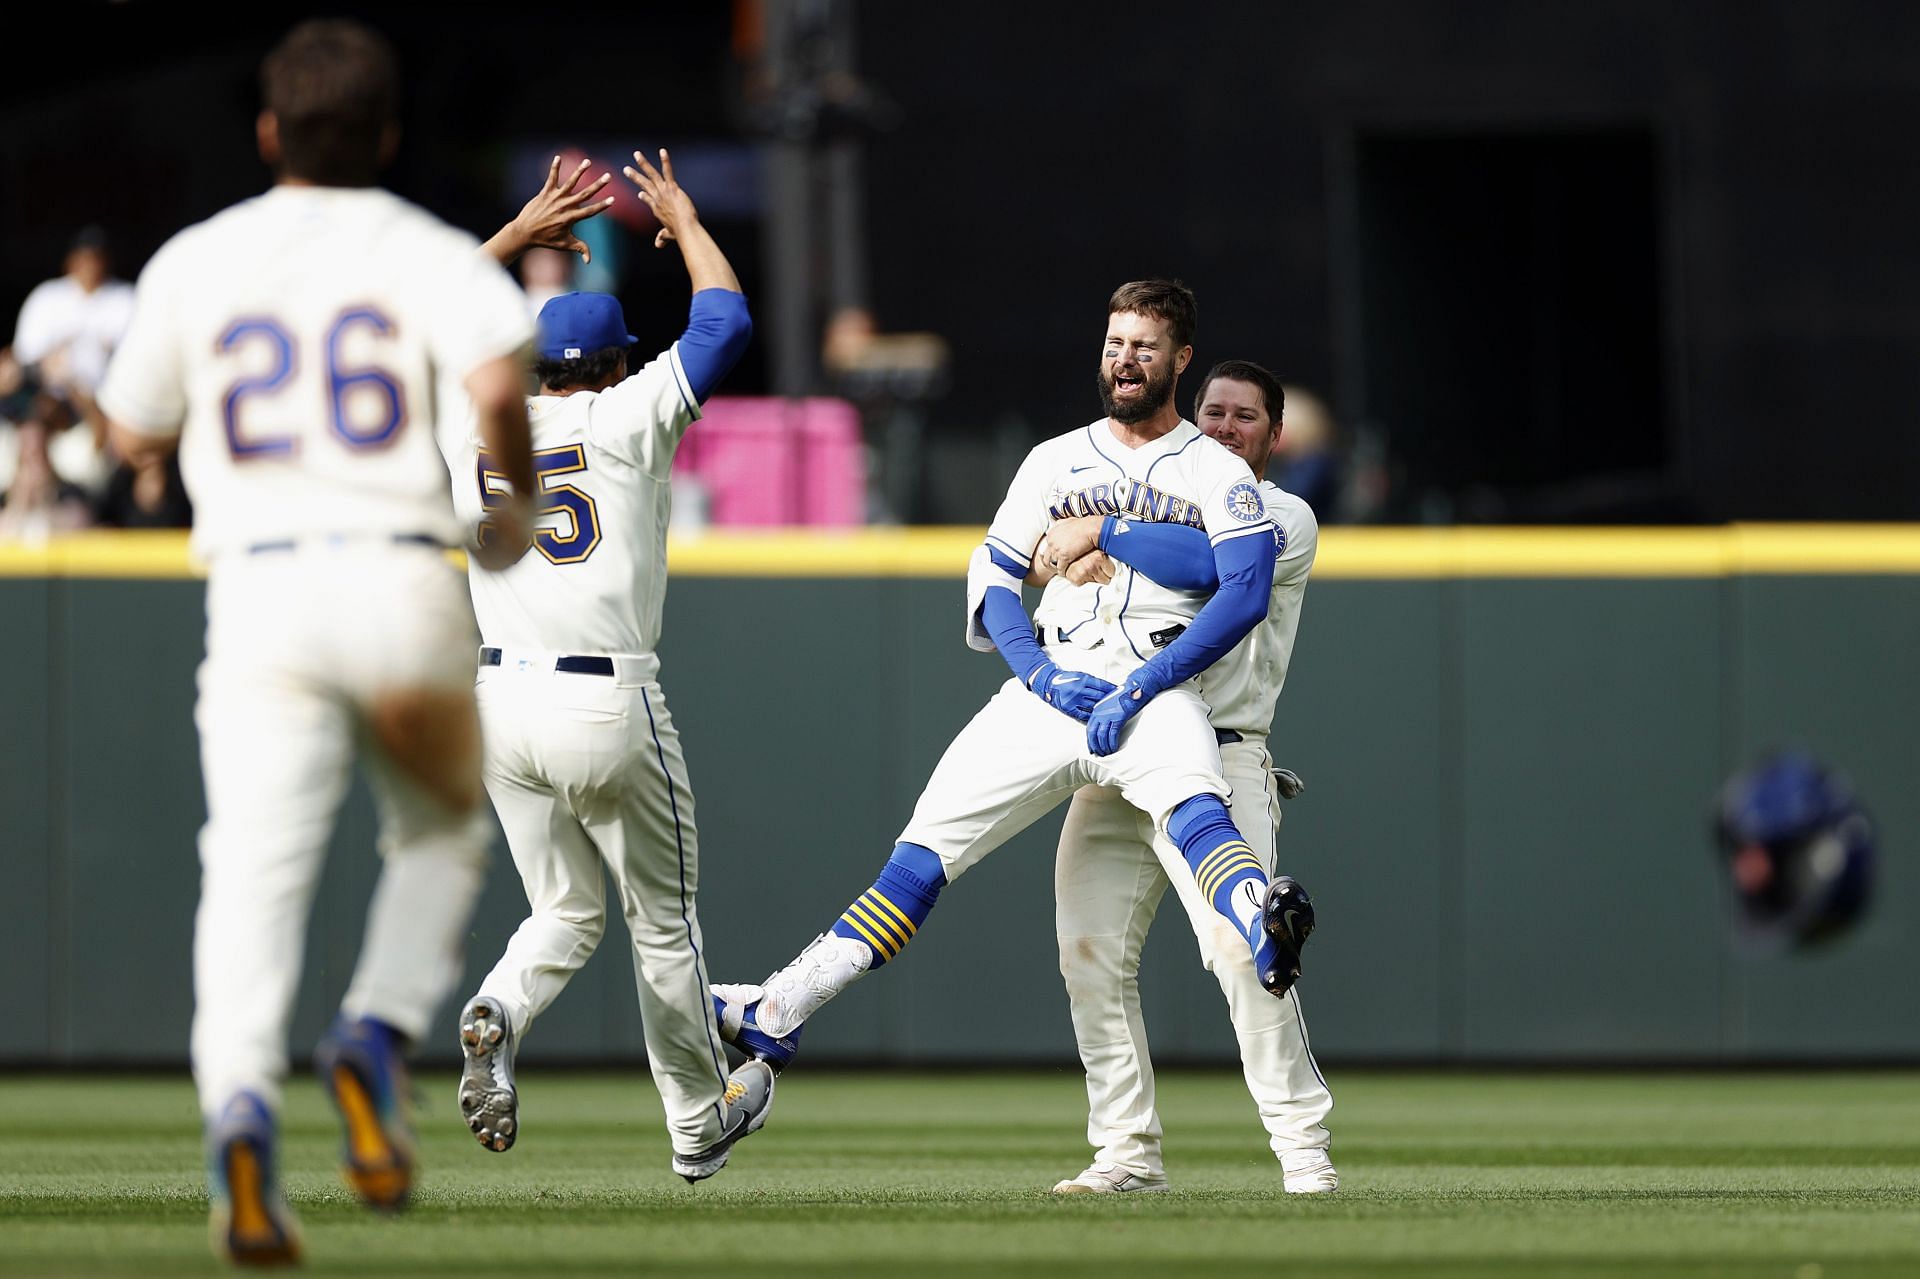 The Mariners have won three straight games and top the MLB AL West.